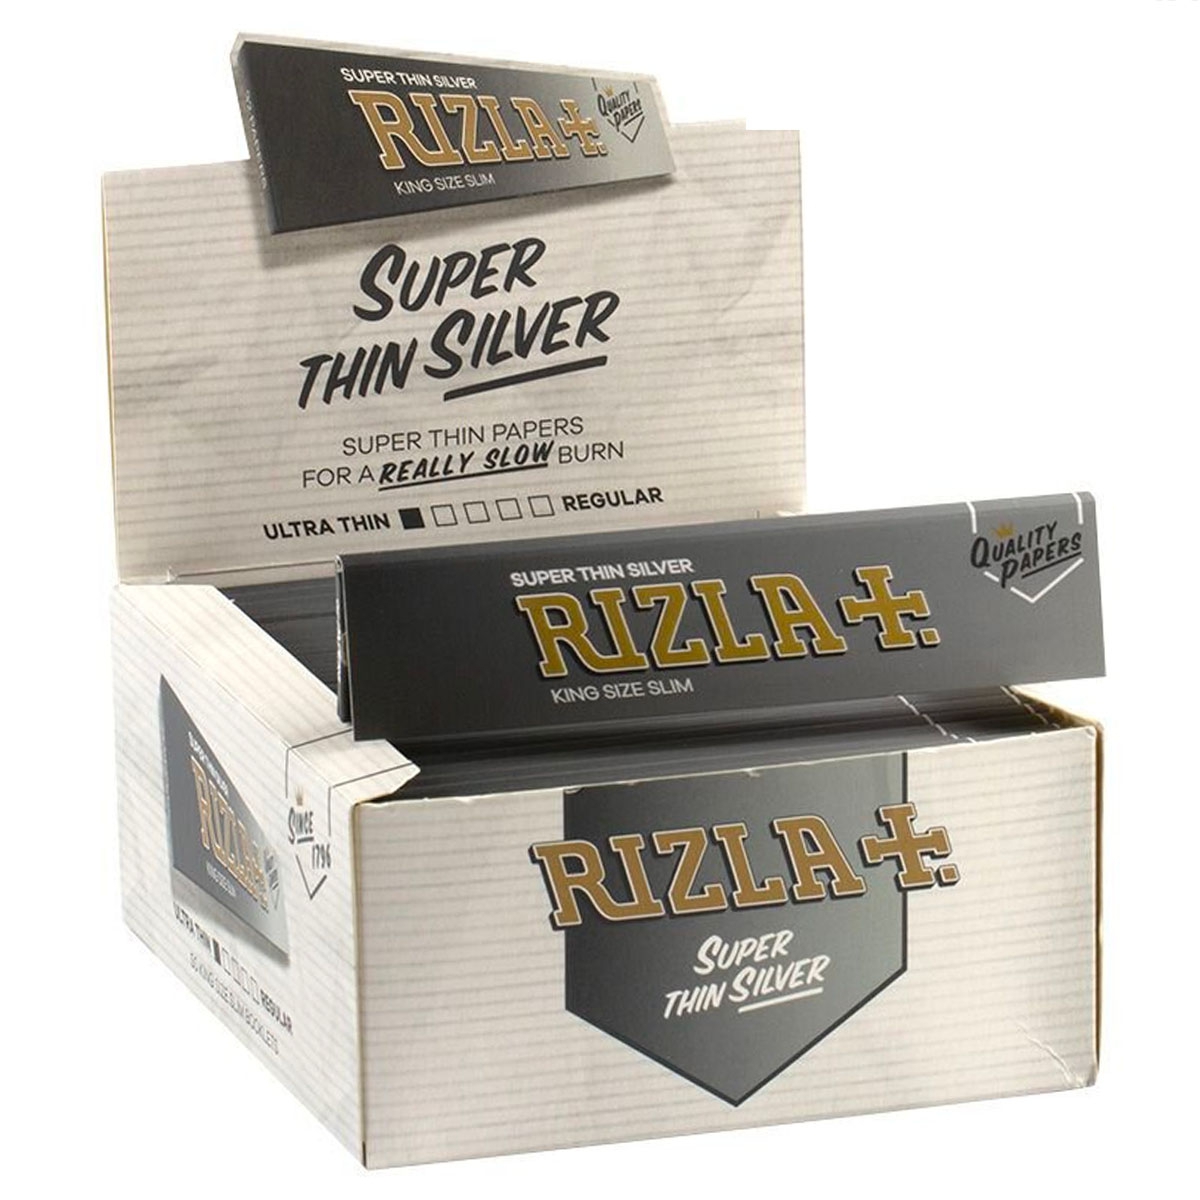 RIZLA SILVER KING SIZE ULTRA SLIM ROLLING PAPER BOX OF 50 BOOKLETS 